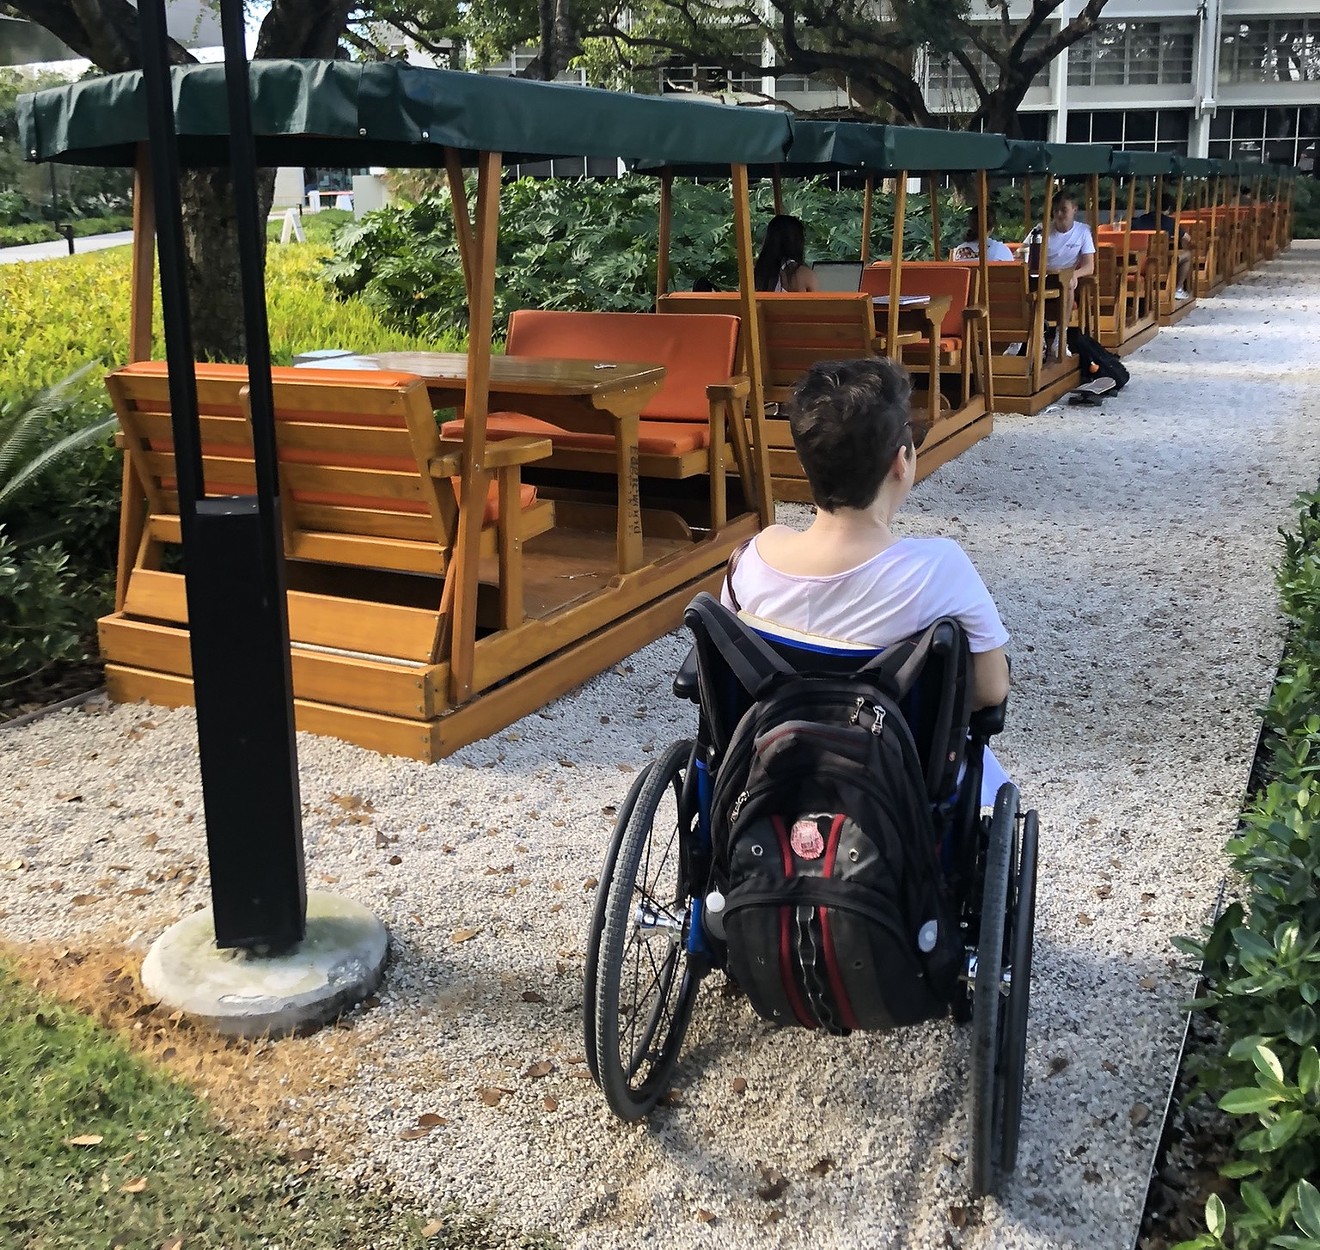 These fancy gliders at the University of Miami are inaccessible to people who use wheelchairs.